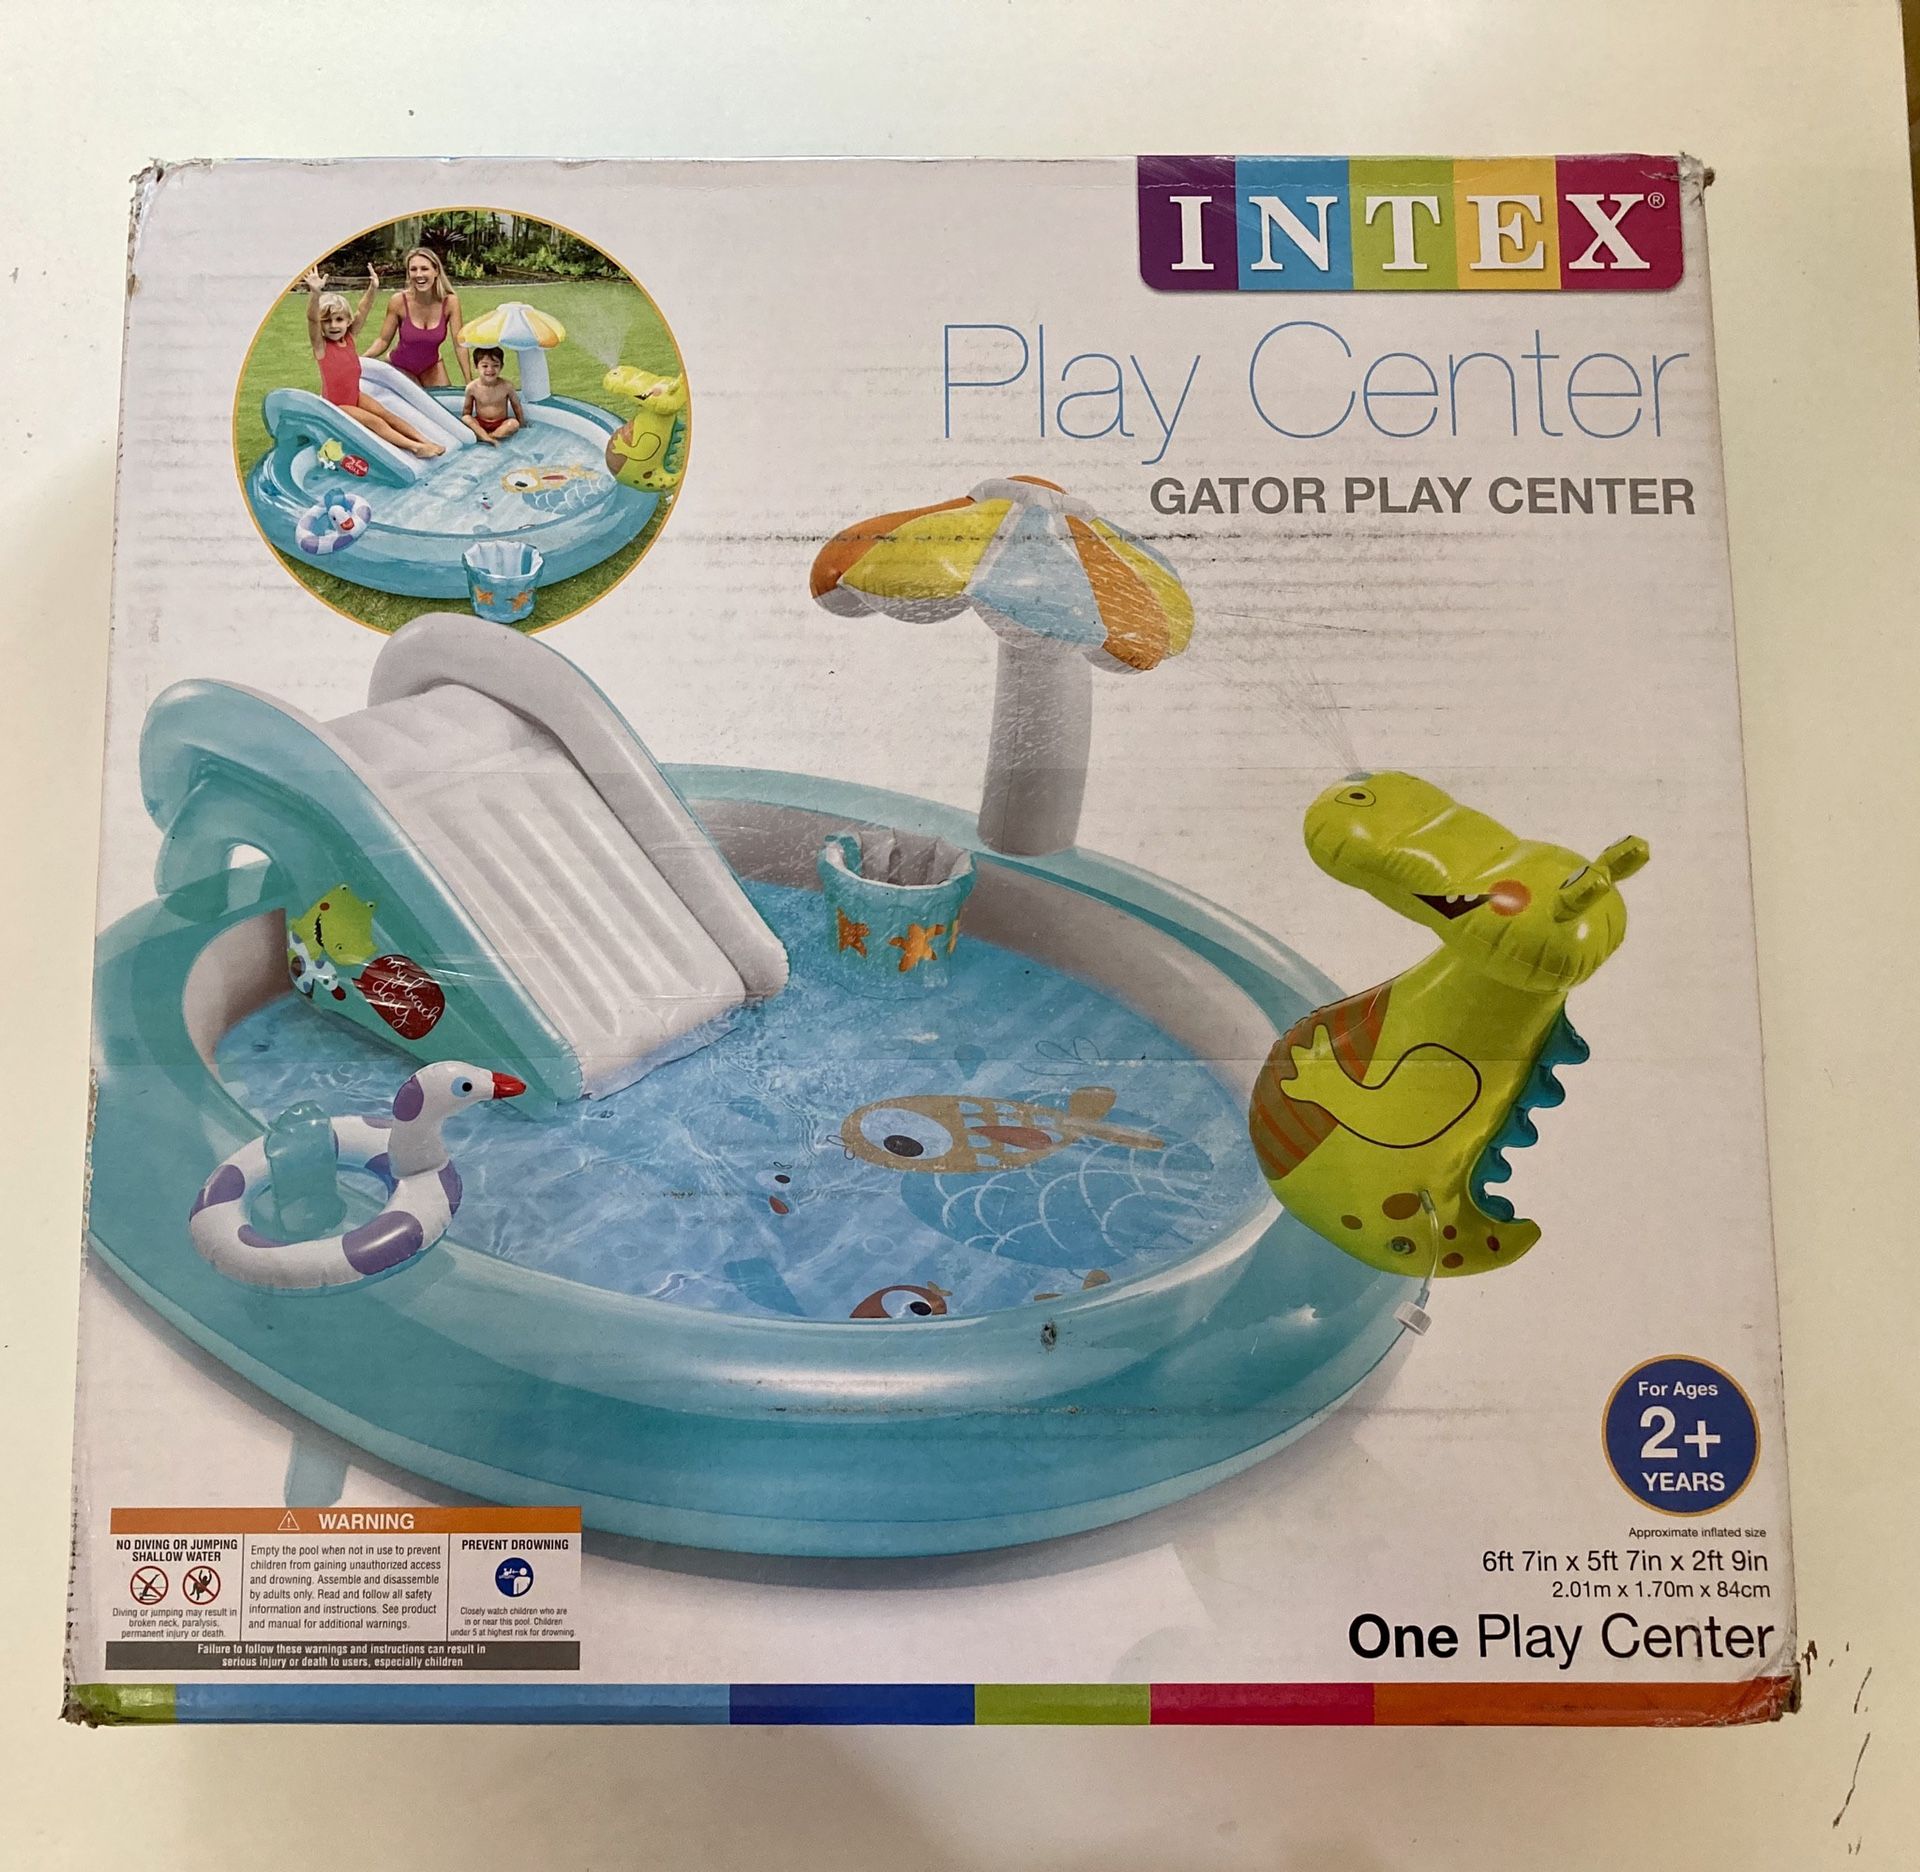 NEW IN BOX - INTEX gator pool play center with slide and sprinkler